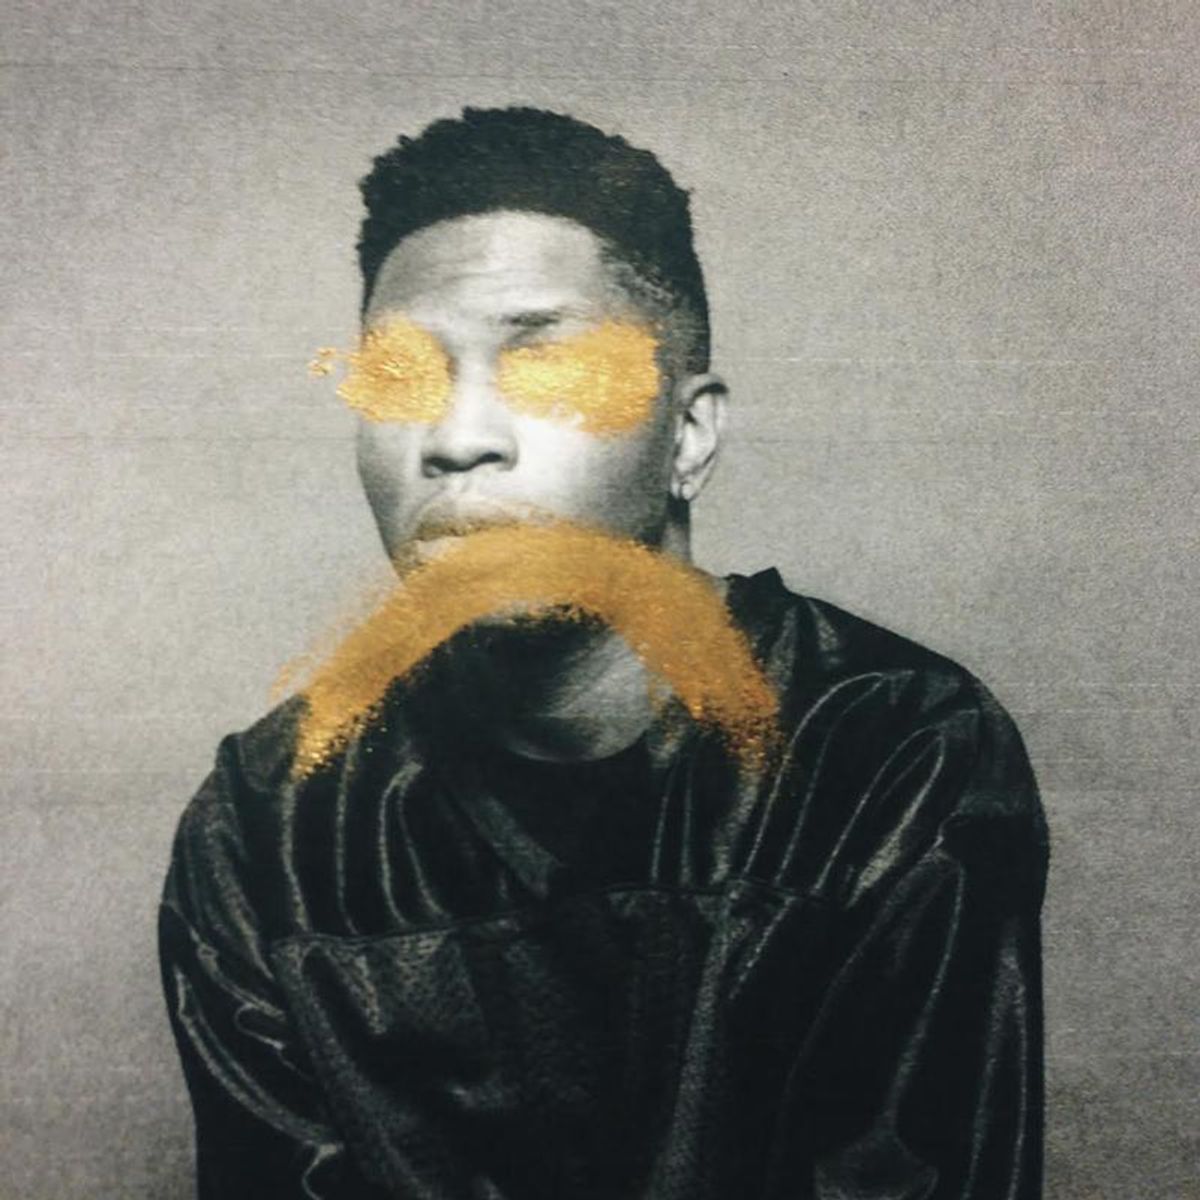 Album Review: "Ology" by Gallant